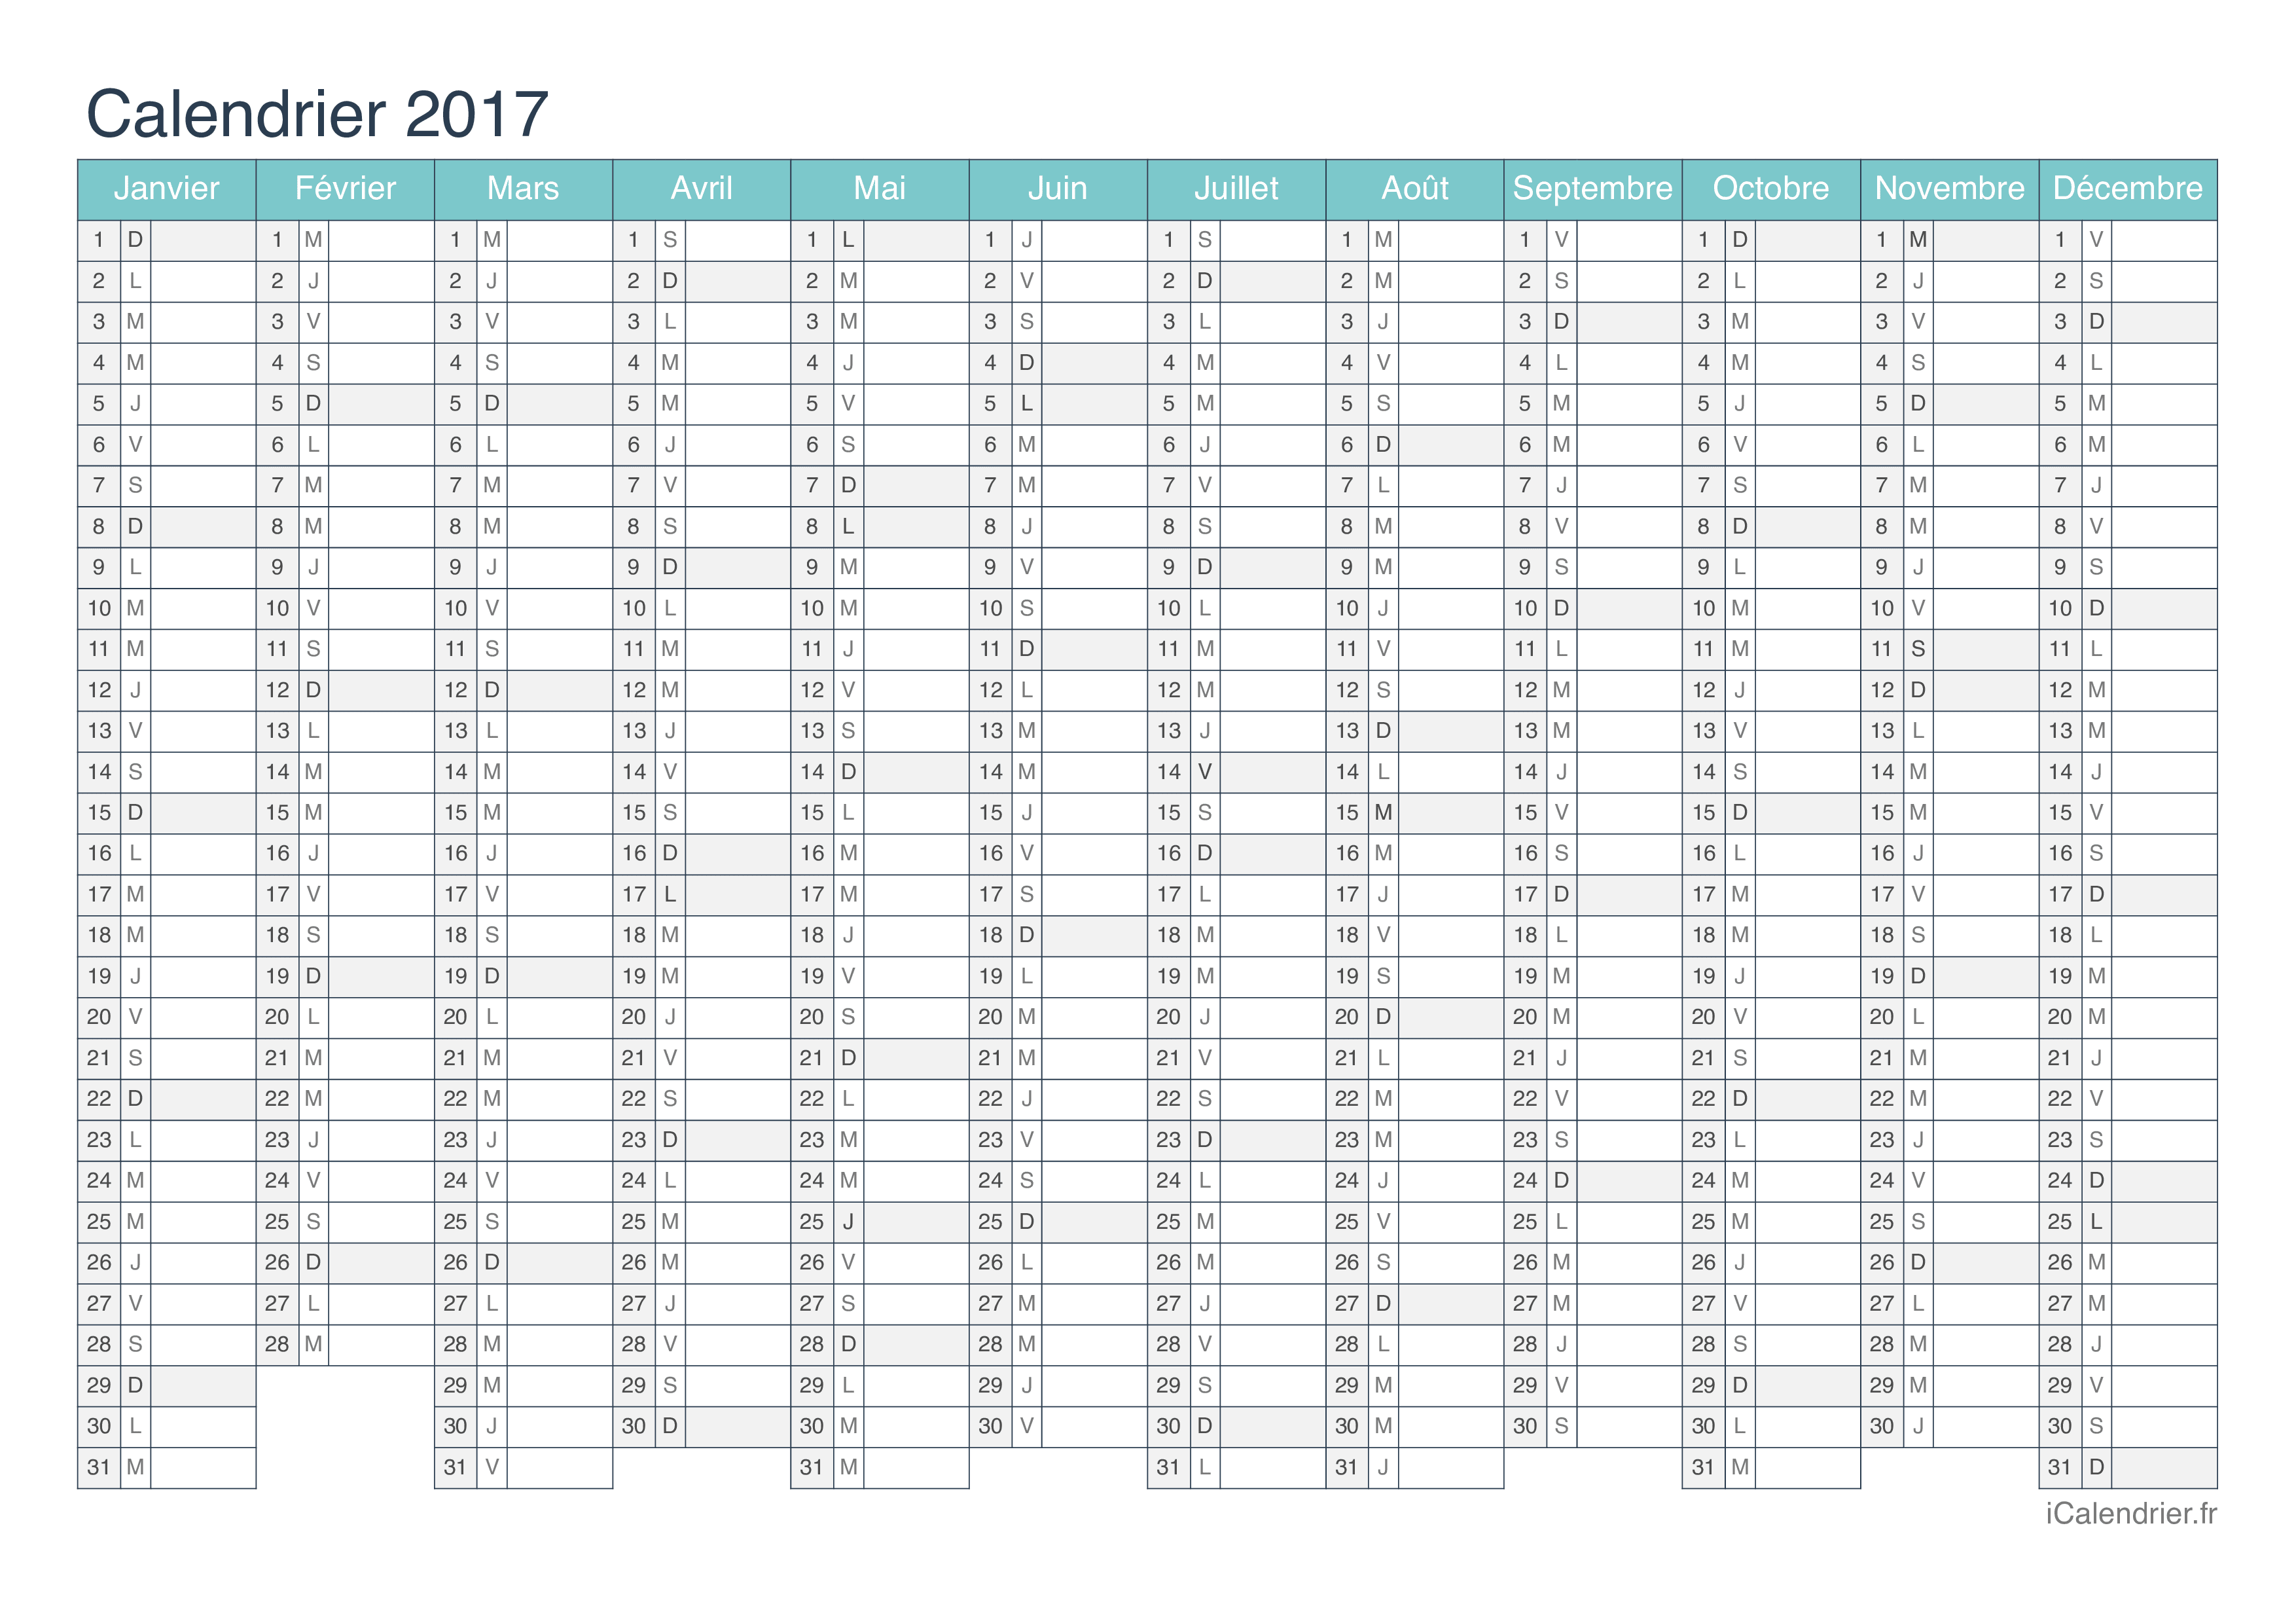 Calendrier 2017 - Turquoise